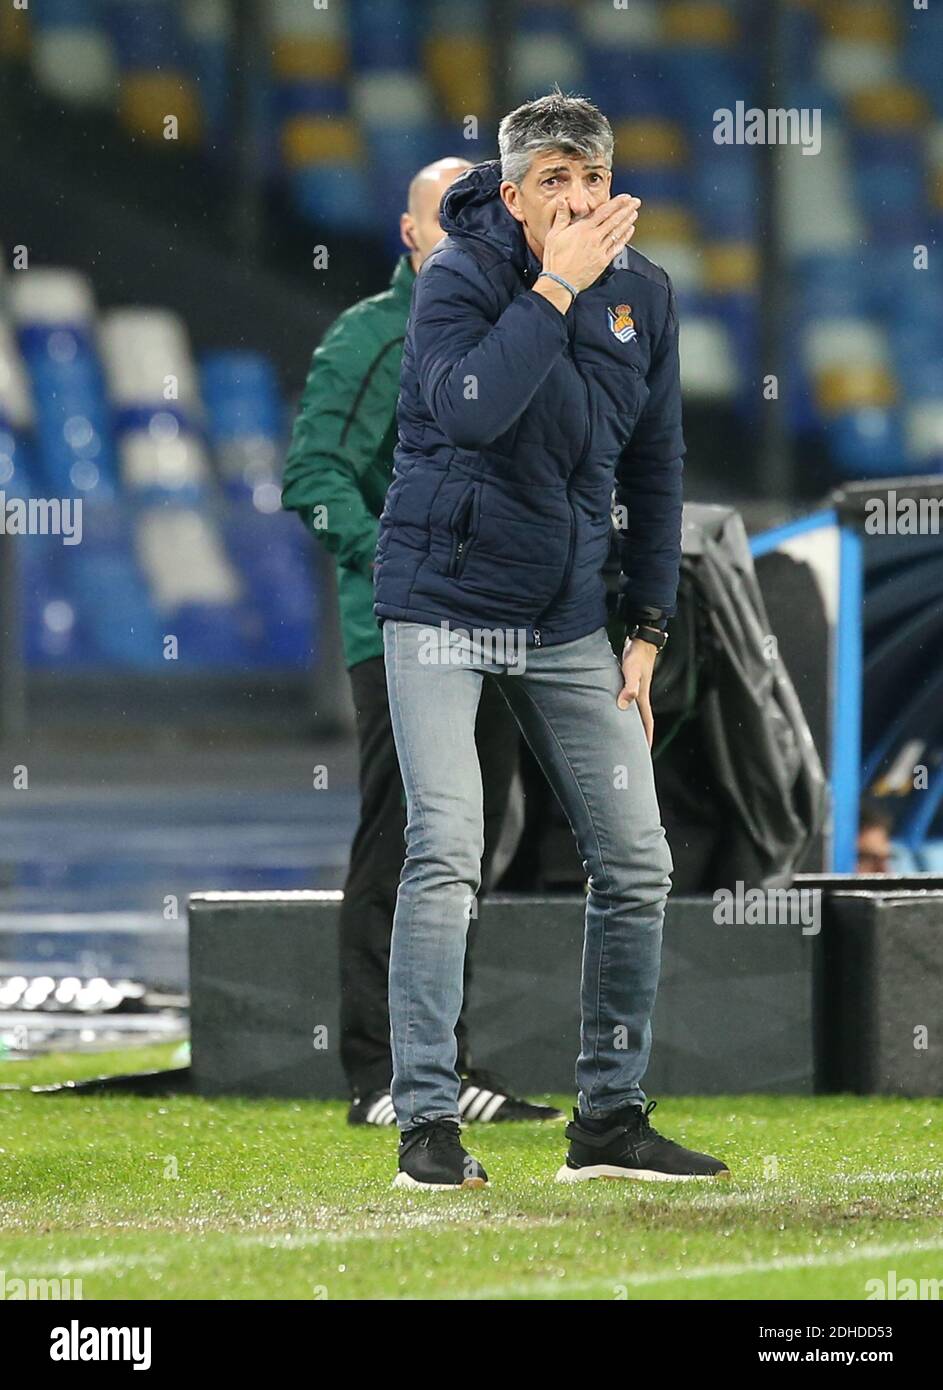 Naples, Italy. 10th Dec, 2020. Real Sociedad's Spanish coach Imanol Alguacil gestures during the UEFA Europa League Group F football match SSC Napoli vs Real Sociedad de Futbol. Napoli and Real Sociedad drew 1-1. Credit: Independent Photo Agency/Alamy Live News Stock Photo